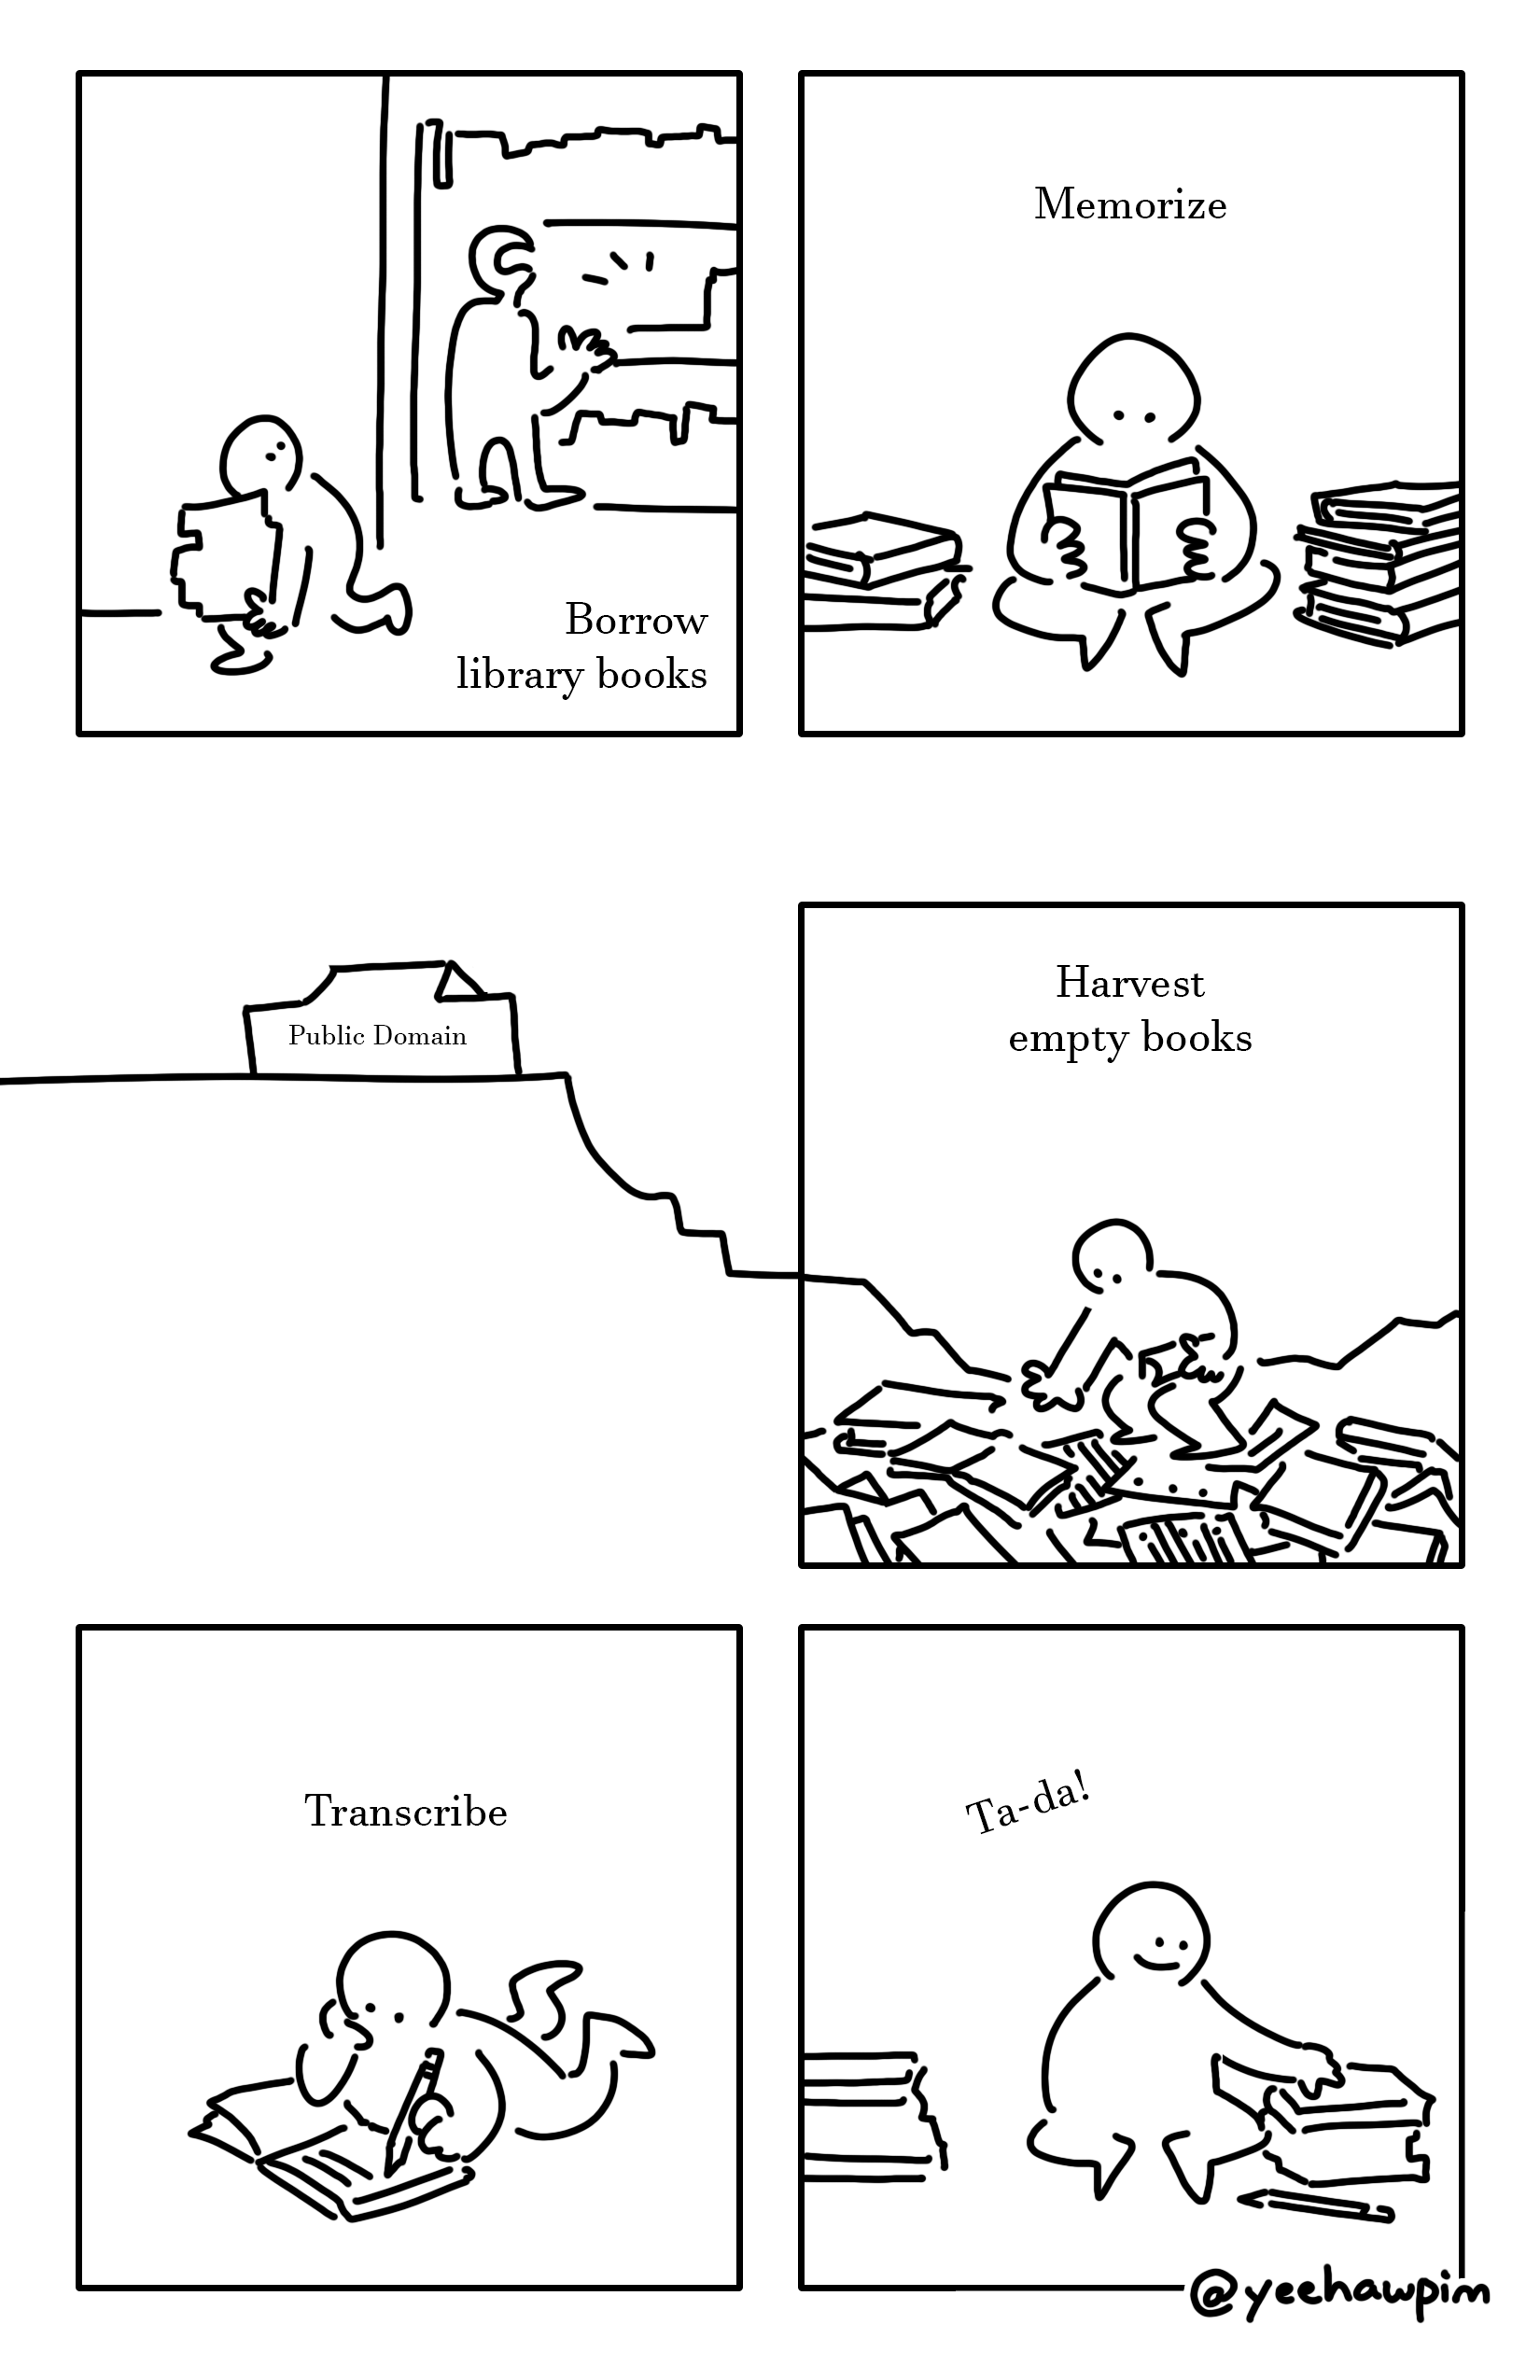 Black and white comic with simple digital drawings. Panel 1: A kid sneaking around the corner with armfuls of books. A taller adult silhouette is looking at a gap in a bookshelf where the missing books are with a shocked frown. Text: Borrow library books Panel 2: The kid sits on the ground with their legs folded, reading a book. There's two piles of books on each side of them. Text: Memorize Panel 3: A building with a domed roof like half a cylinder labelled "Public Domain" sits on the edge of a deep slant into the ground. Panel 4: The slanting line leads into the background of the panel. The kid bends down to pick up a book on the ground in the pile of books and paper they stand on. Lined paper and hole-punched blank paper can be seen in the pile. Text: Harvest empty books Panel 5: The kid with their chin in their hand and sprawled on their stomach as they write in an empty book with a pencil. They're left handed. Text: Transcribe Panel 6: The kid smiles and sits cross-legged, a hand on a pile of books to the right. There is another pile on the ground to the left. The pencil lays discarded on the ground. Text: Ta-da! Watermark in the bottom right corner of the panel: @yeehawpim